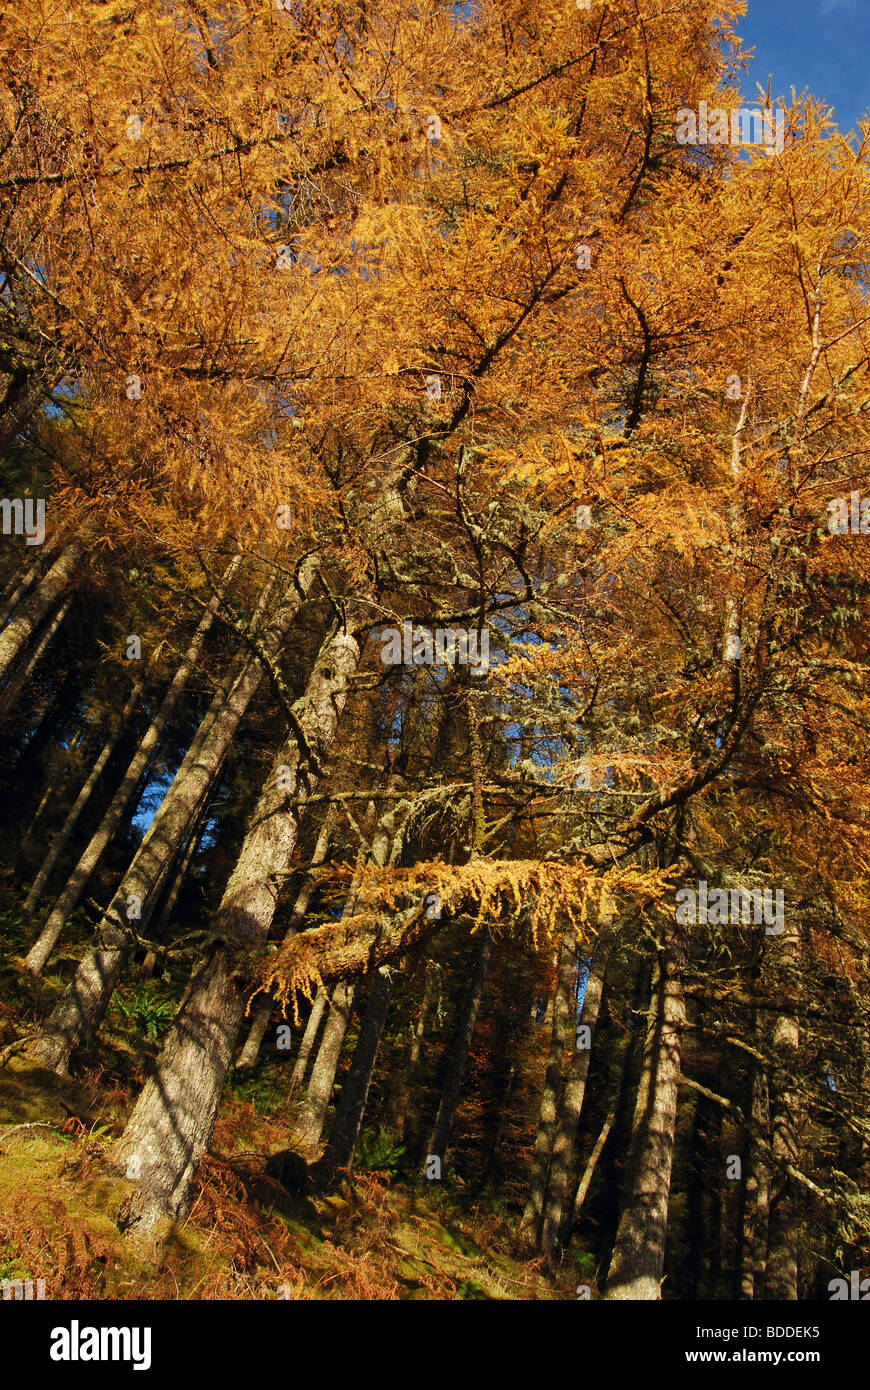 Forest of Larch trees in full Autumn colour, Kilchrenan, Loch Awe, Argyll, Scotland, UK. Stock Photo